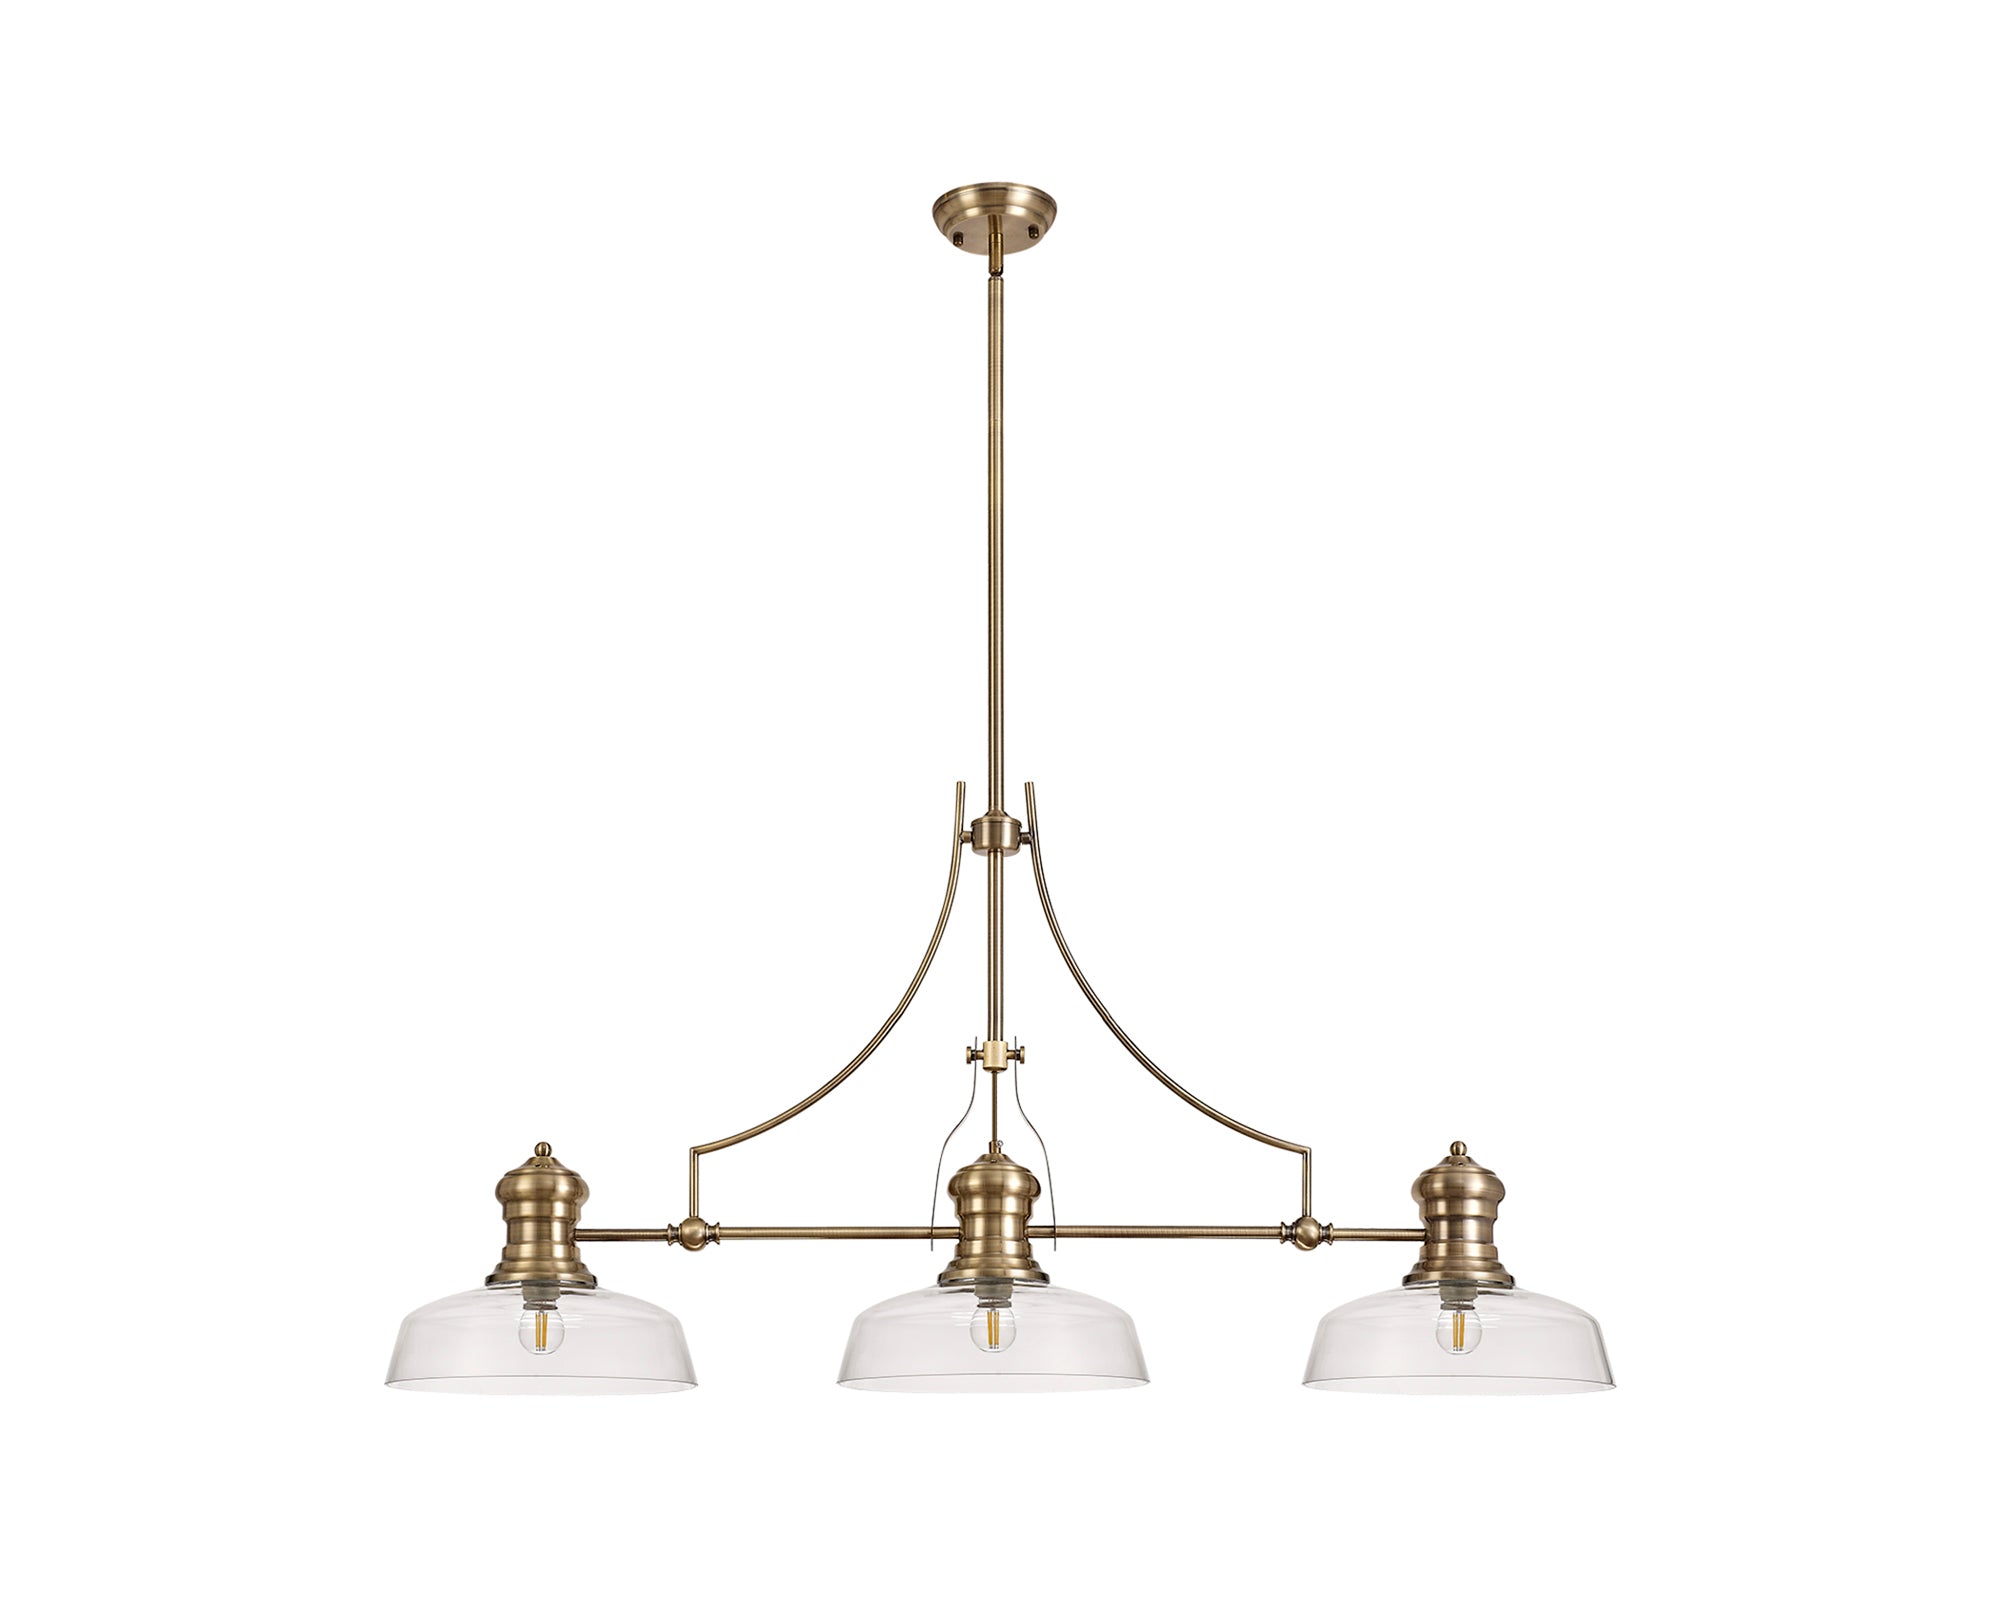 Docker 3 Light Linear Pendant E27 With 30cm Flat Round Glass Shade, Antique Brass, Clear